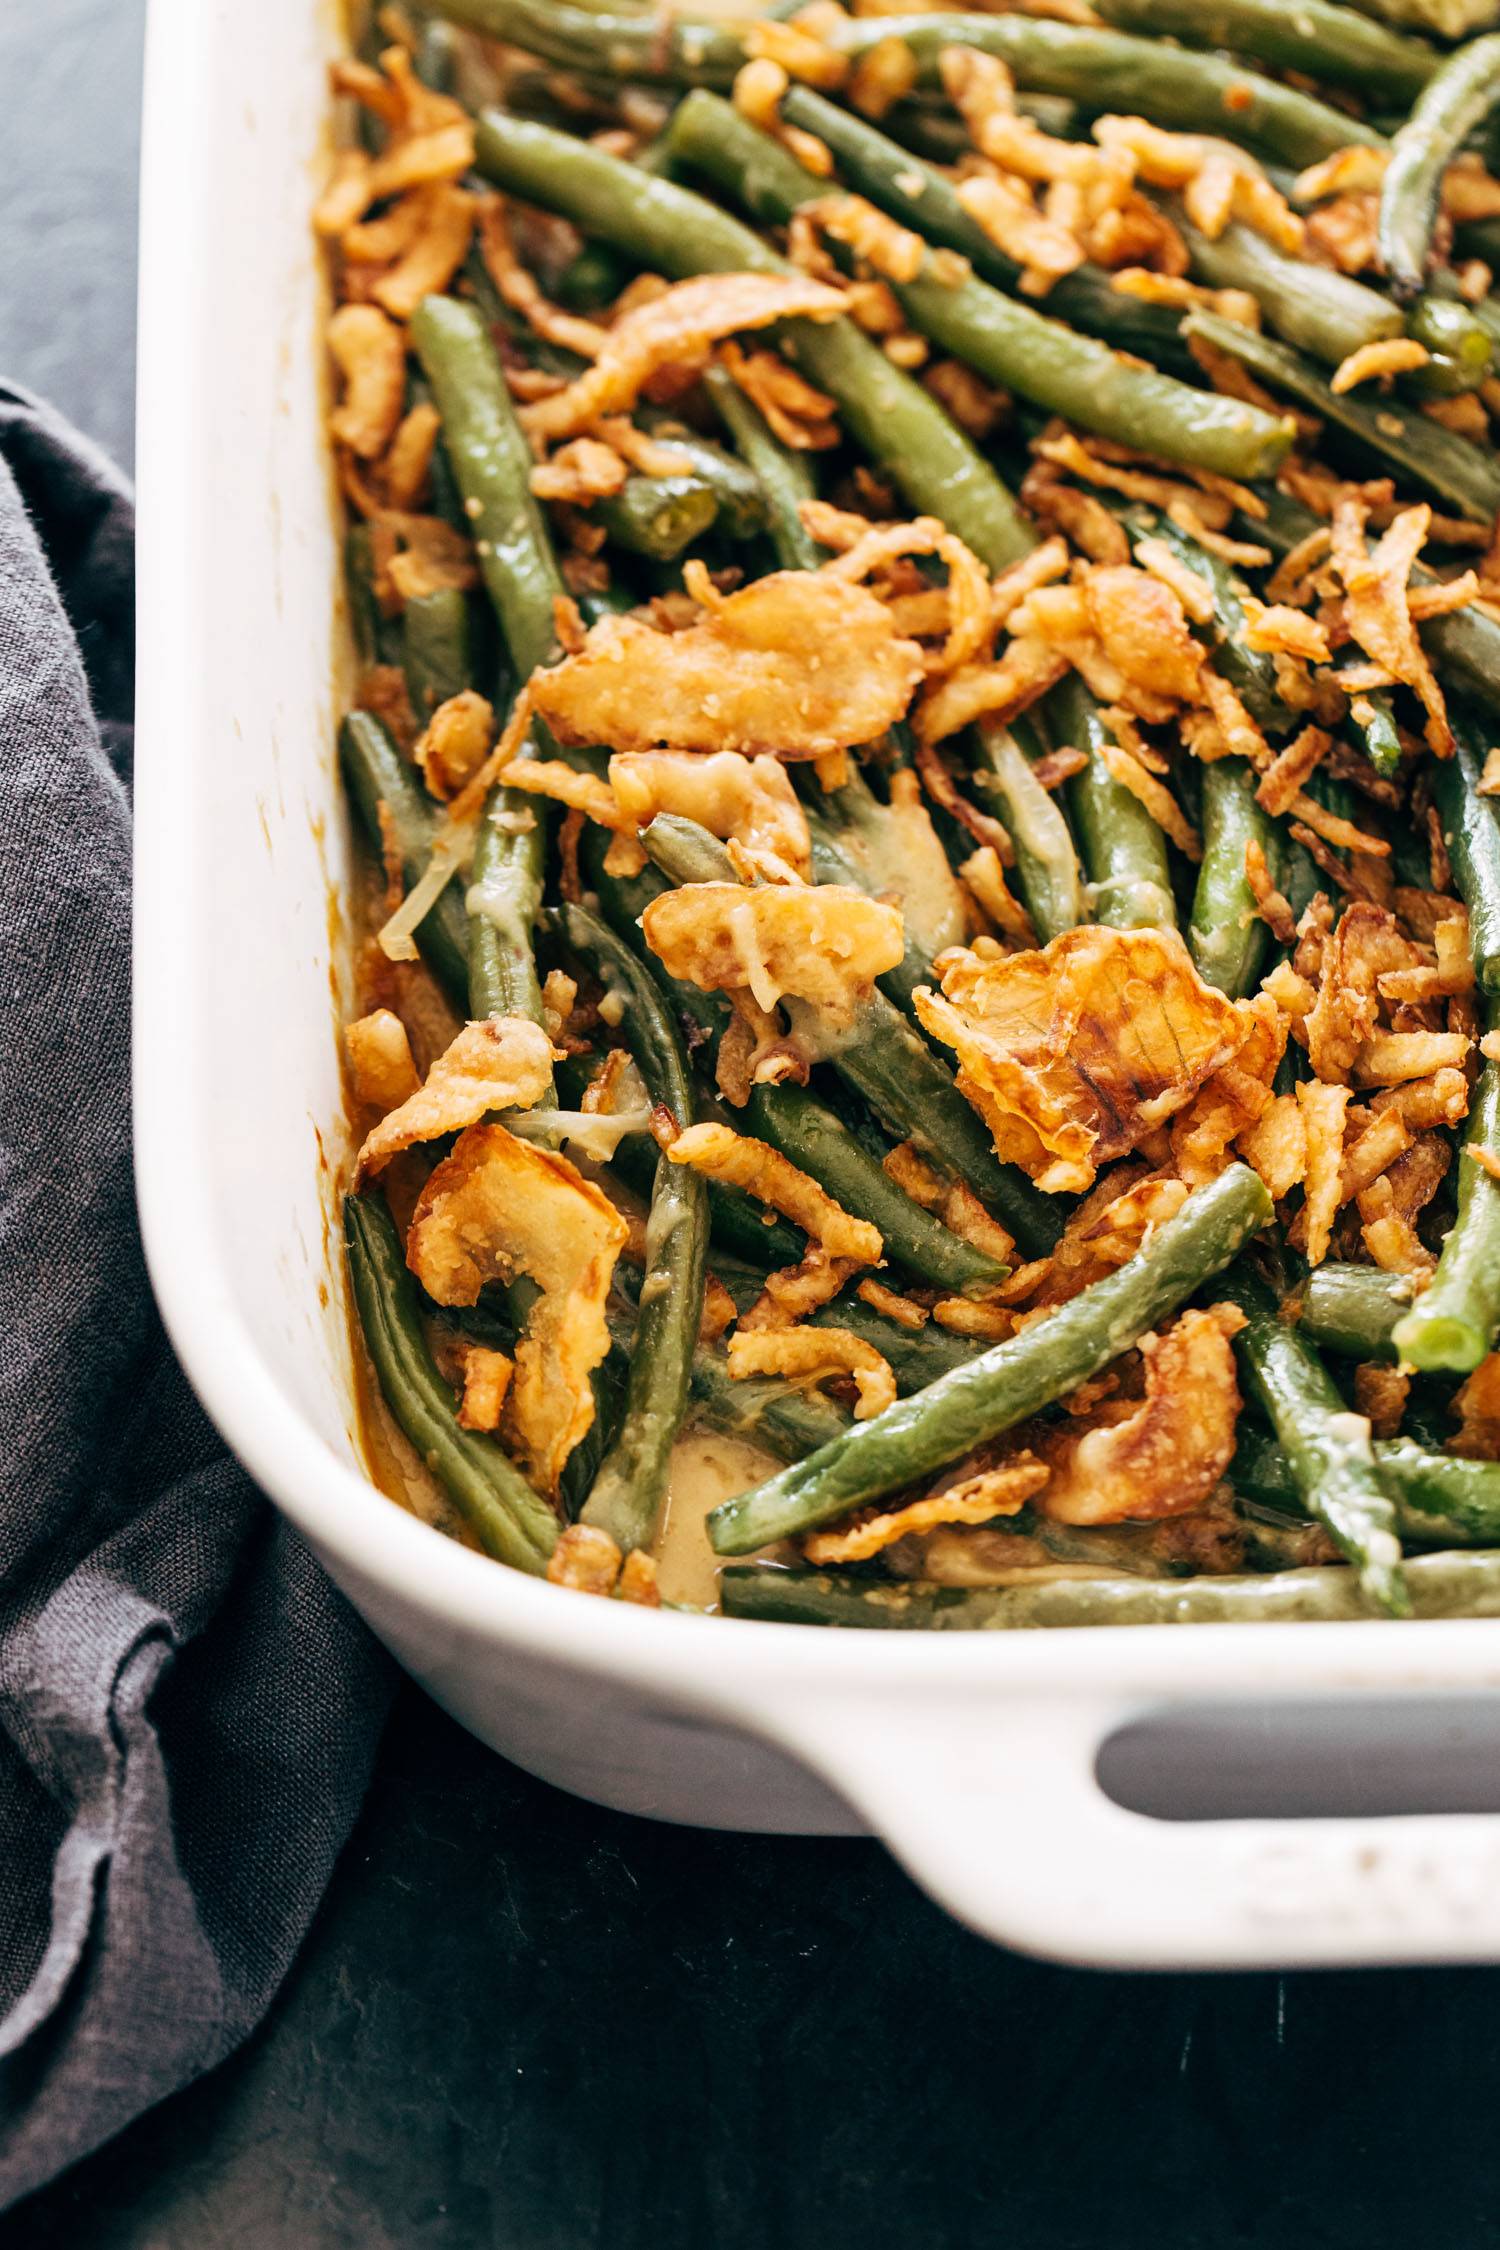 Green bean casserole in a white casserole dish with crispy fried onions on top.